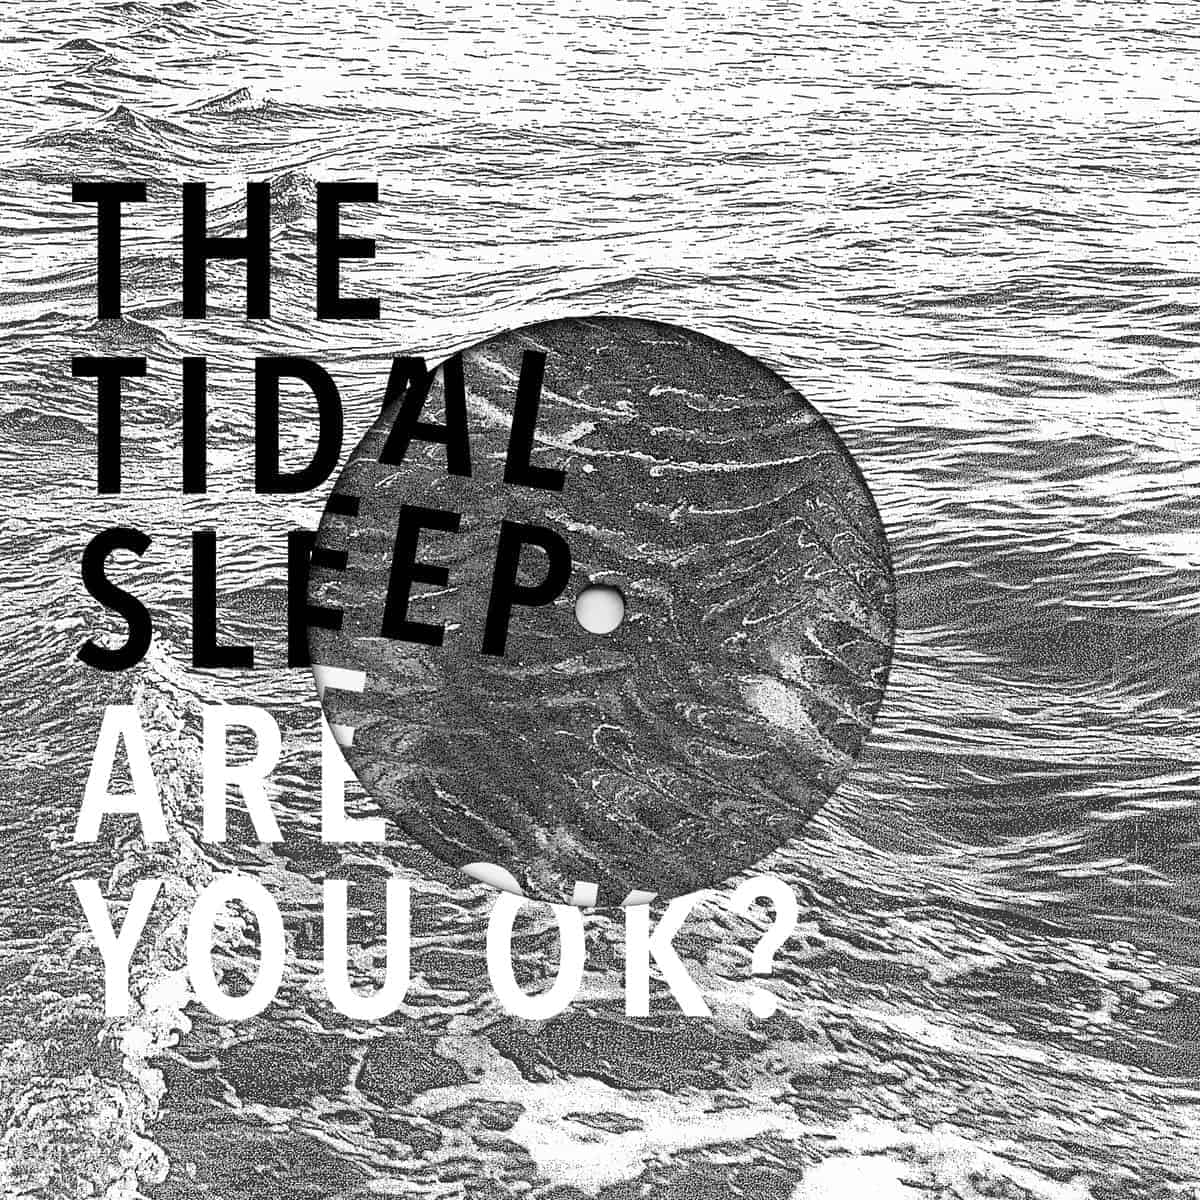 The Tidal Sleep / Svalbard split 7″ Pressing Info: 150x clear (SOLD OUT), 450x white all copies come with a die-cut cover and download!